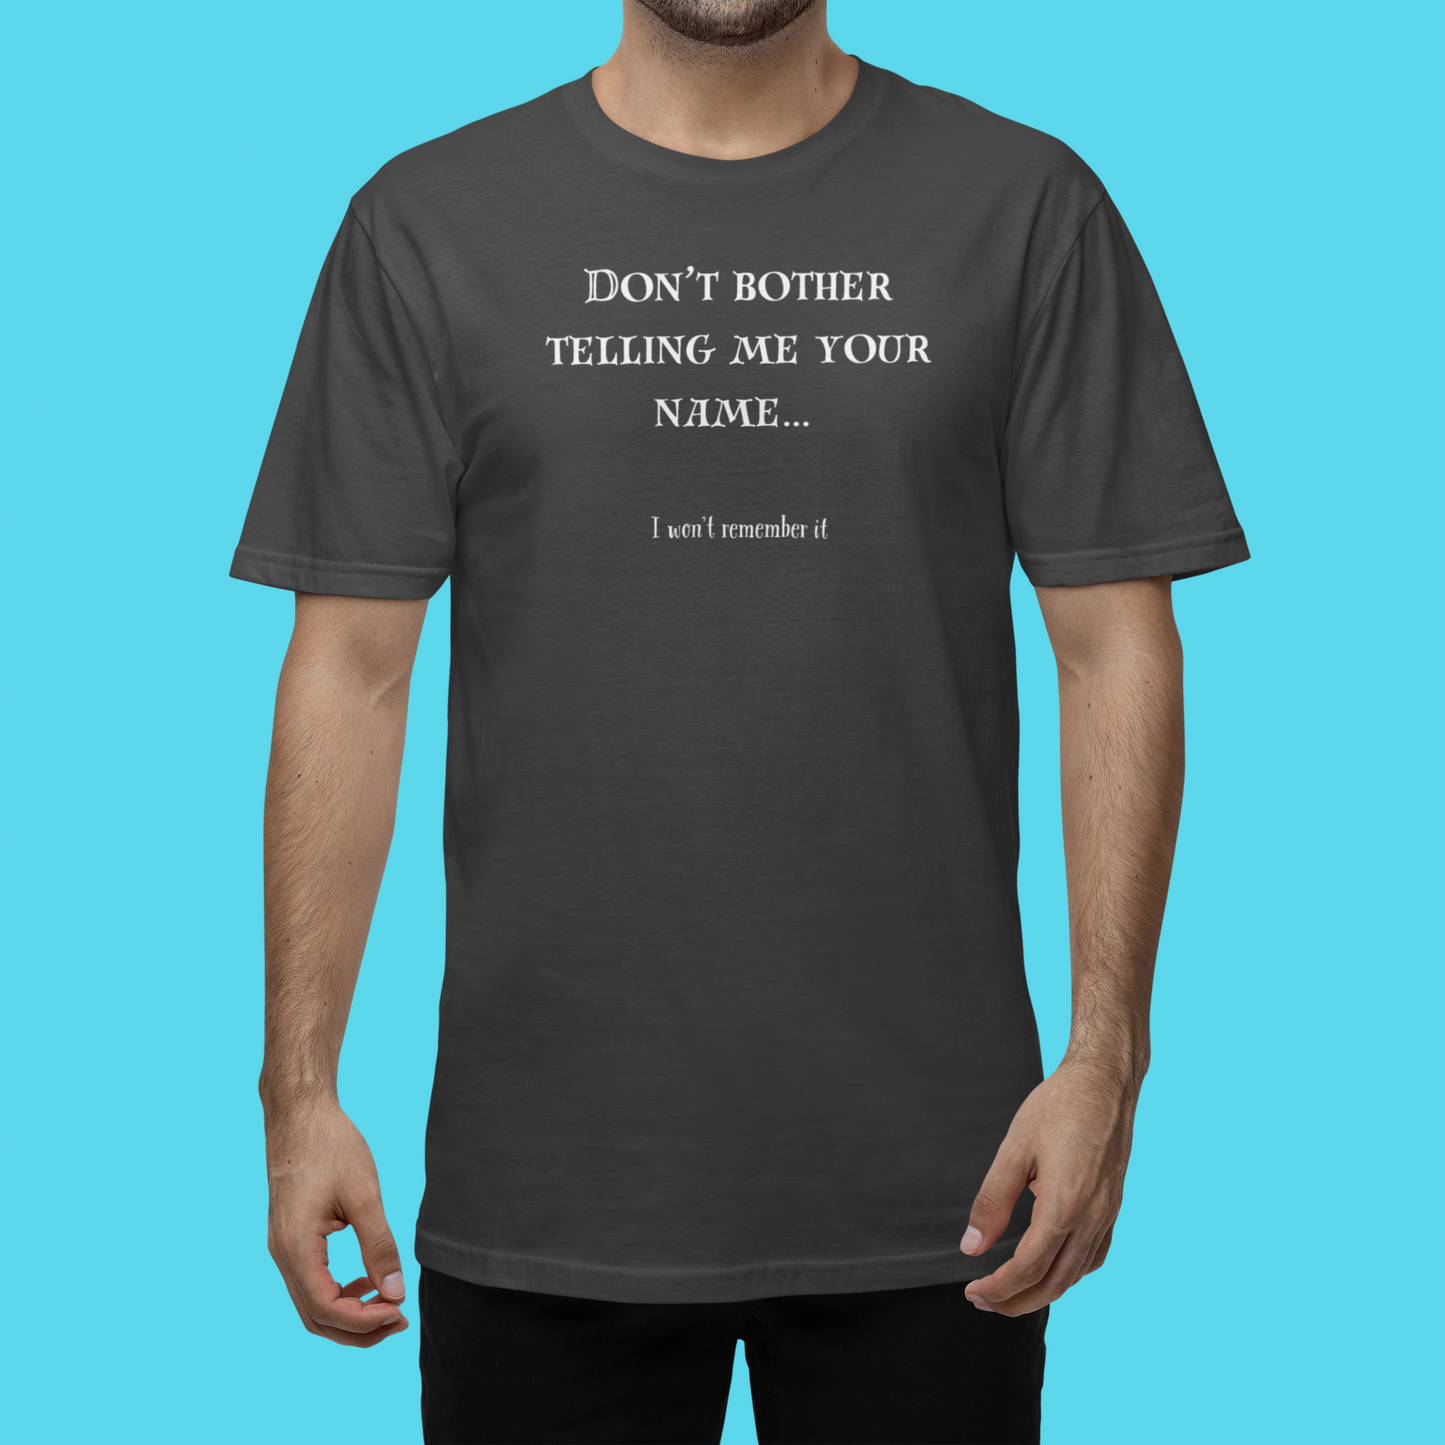 Don't Bother Unisex Softstyle T-Shirt